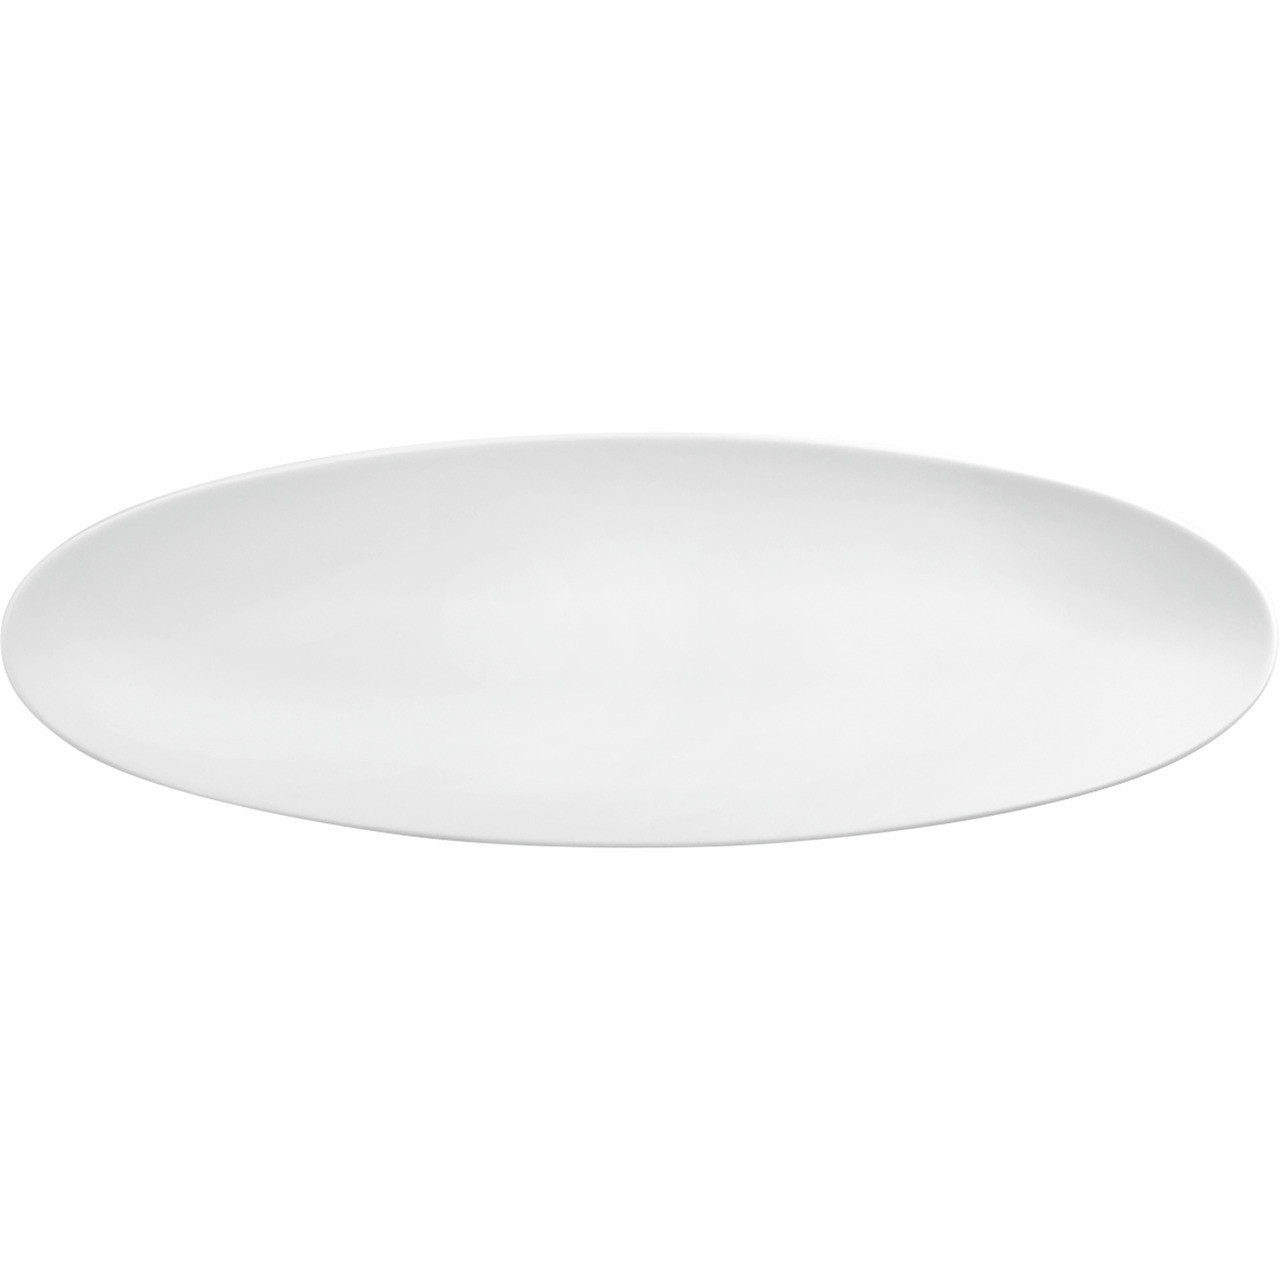 Coup Fine Dining, Coupplatte oval 441 x 142 mm weiß uni